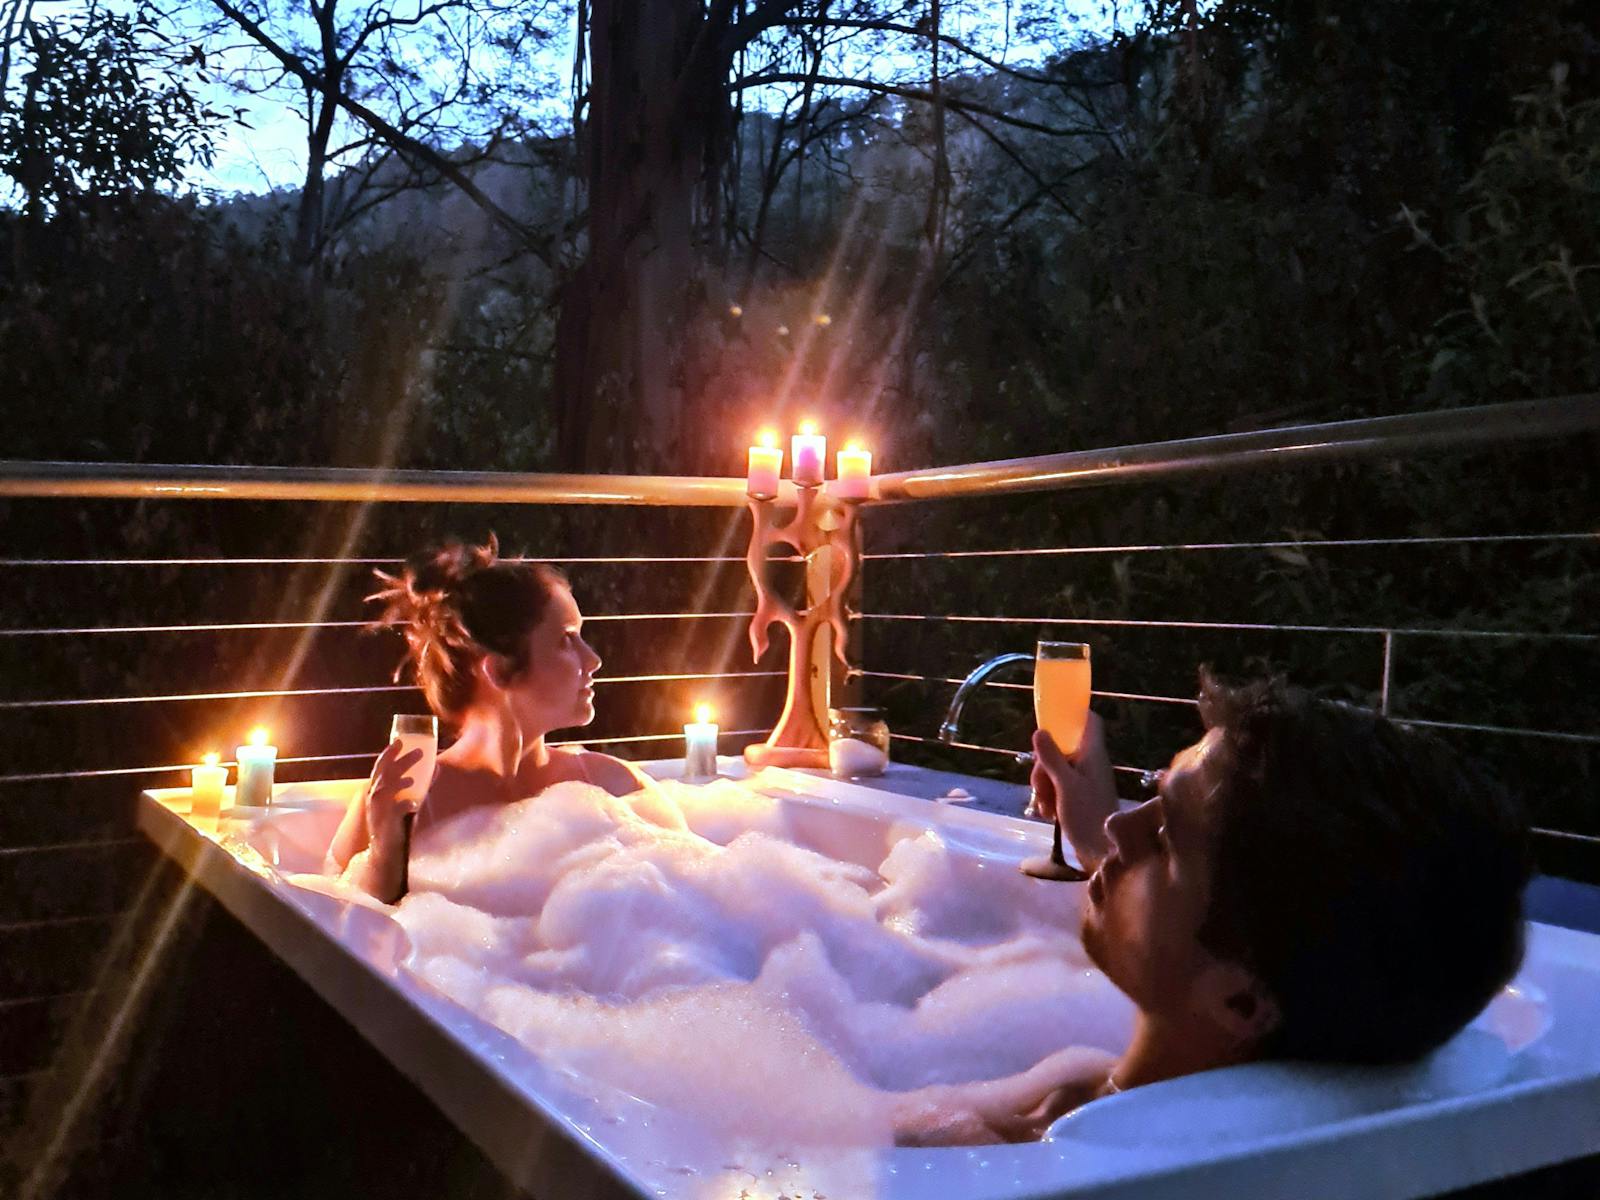 Private and romantic, this hot bath on the back deck is the perfect relaxing end to the day